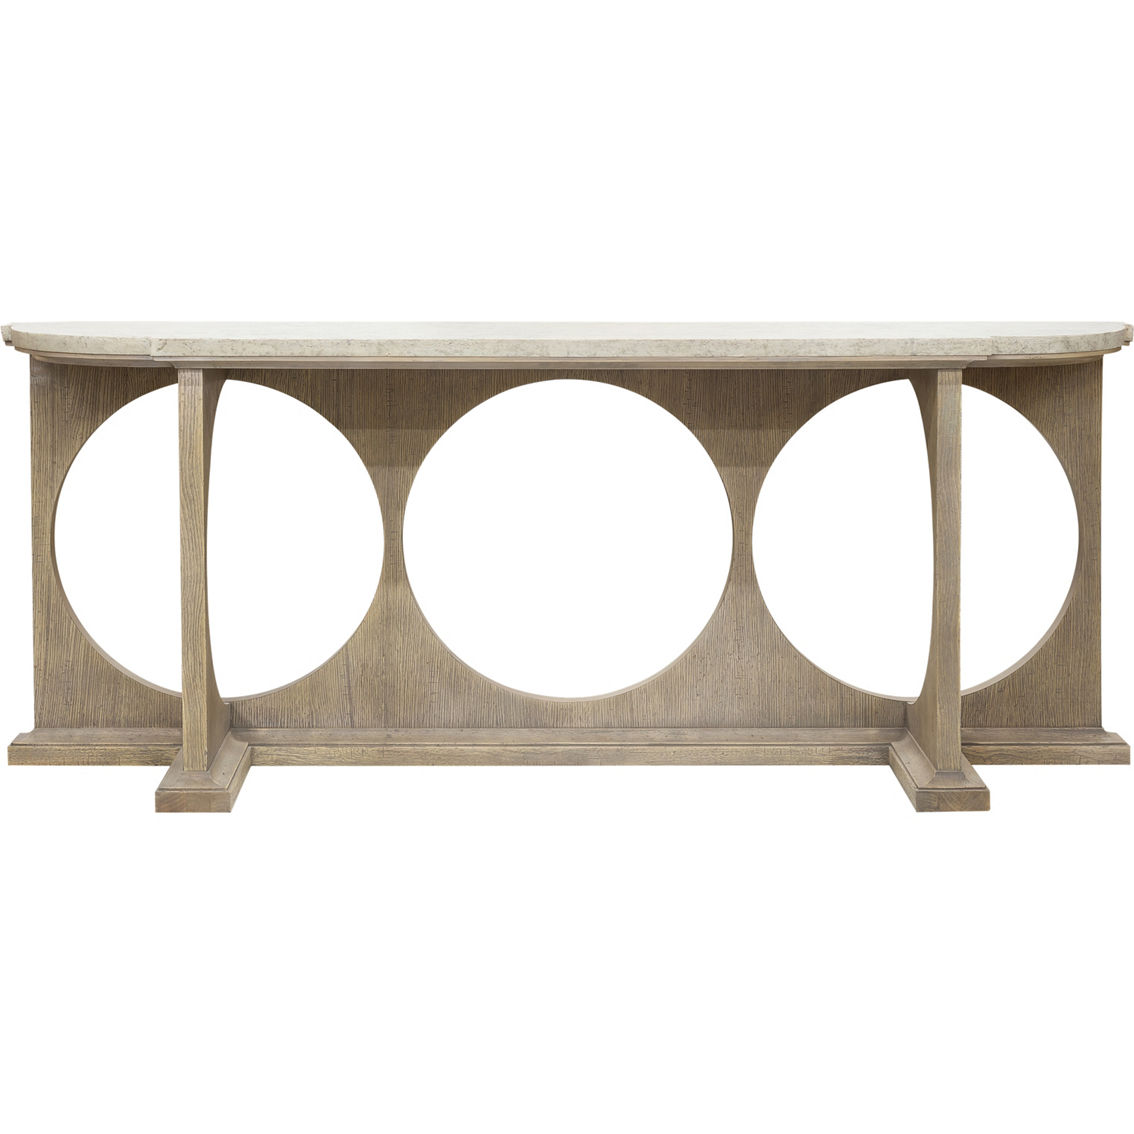 Pulaski Furniture Modern Entryway Console Table with Concrete Top - Image 2 of 4